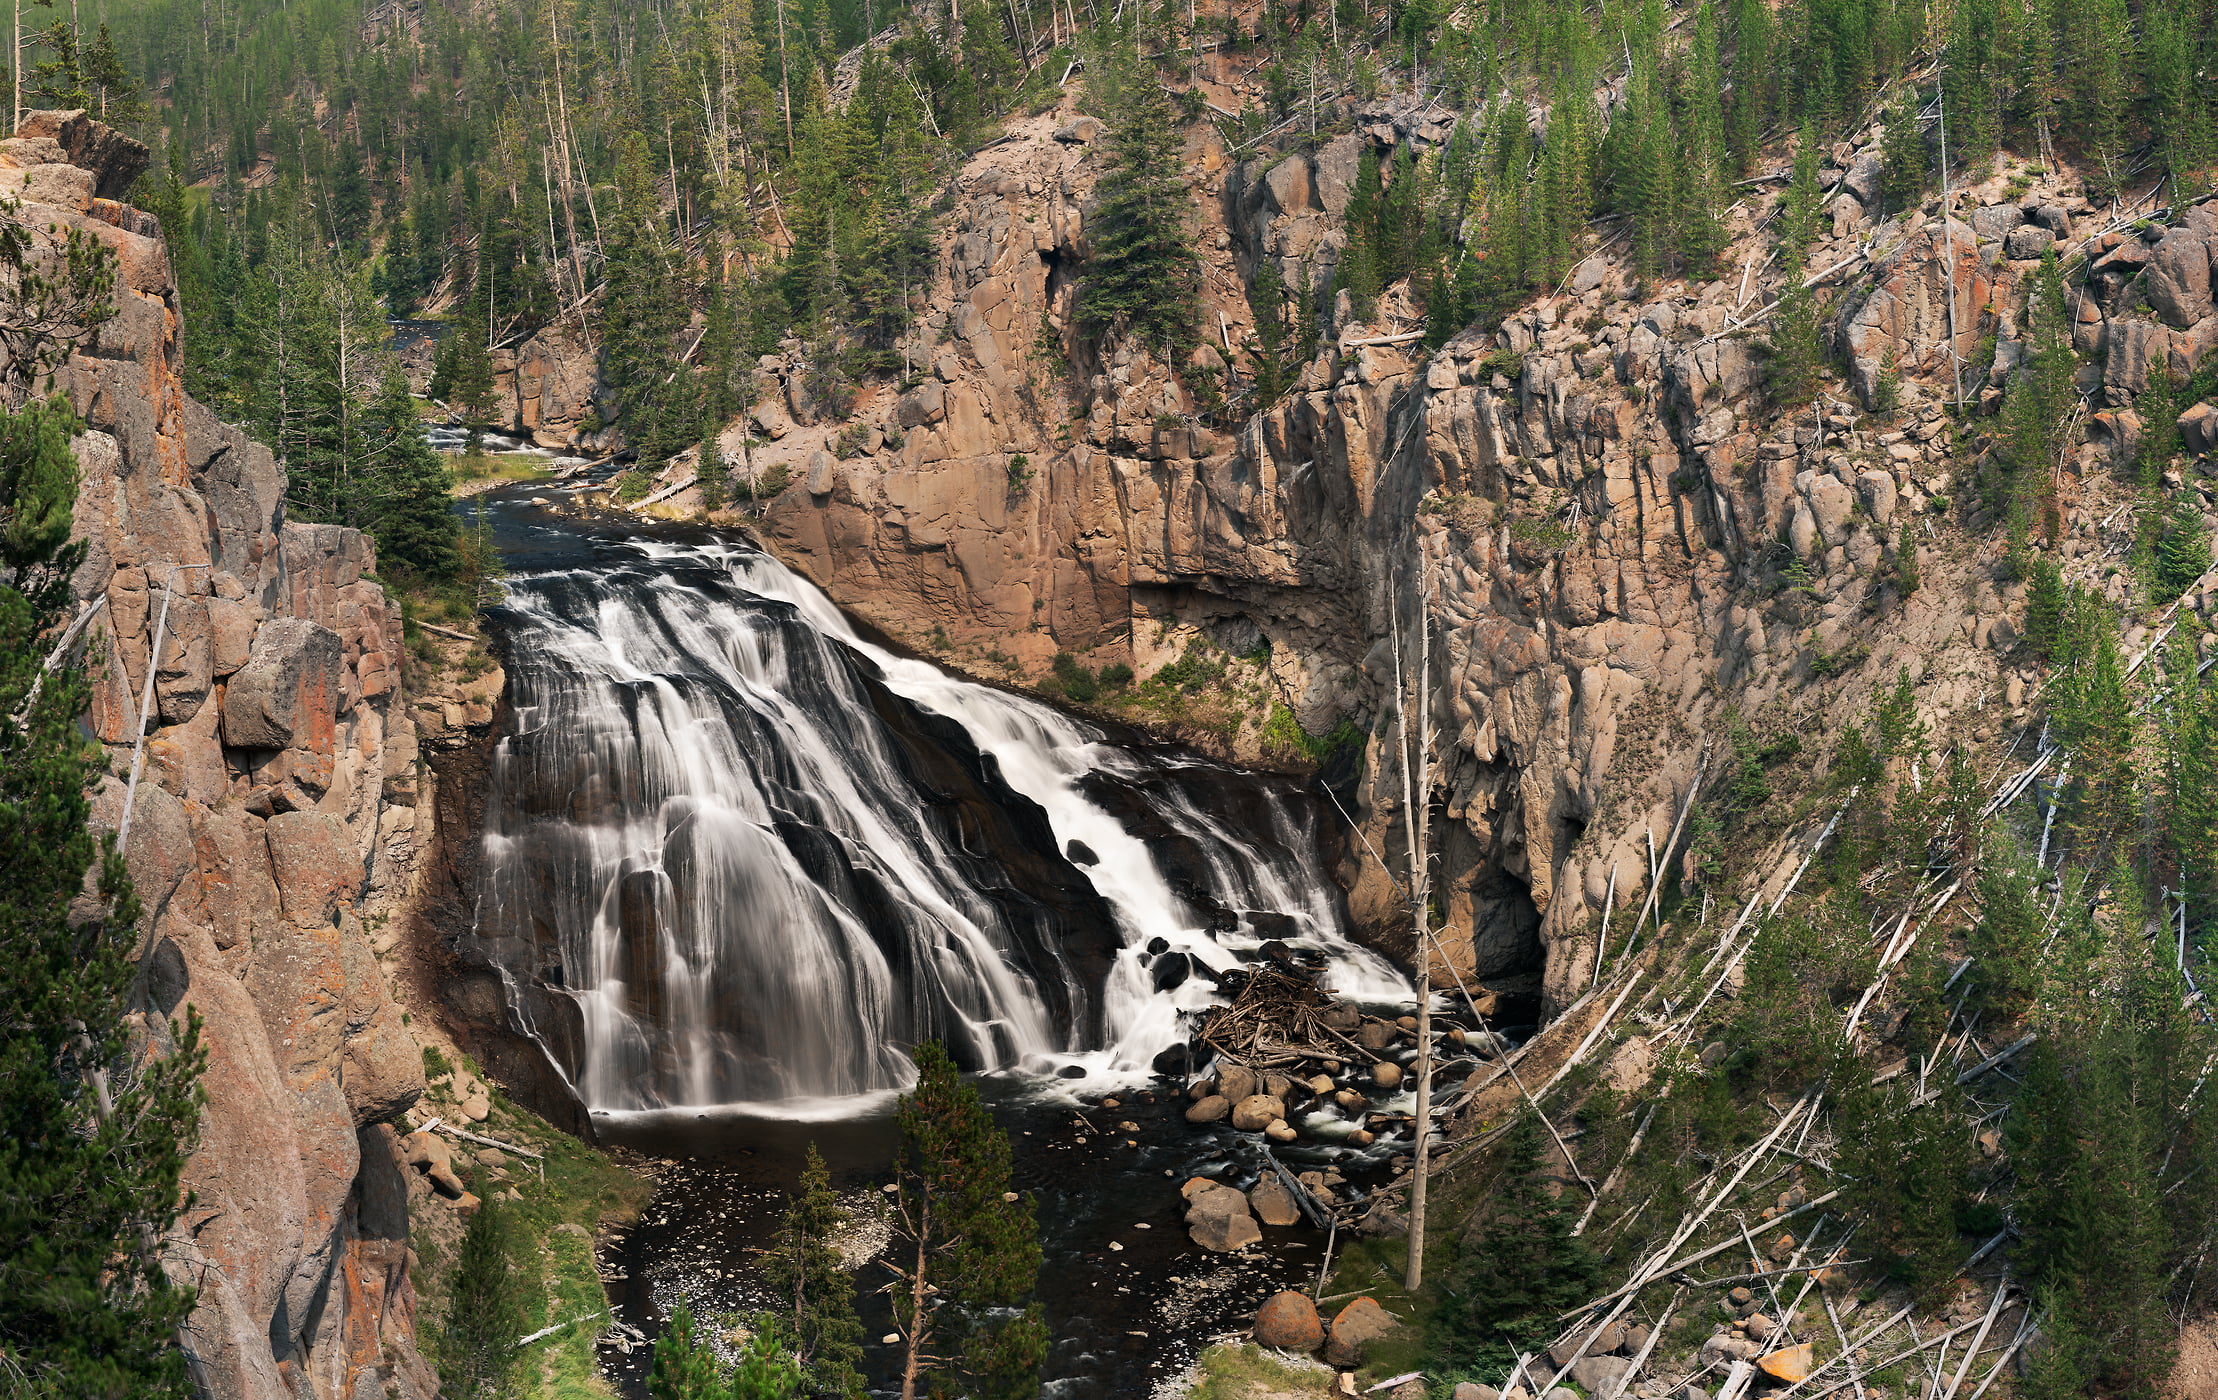 660 megapixels! A very high resolution, large-format VAST photo print of Gibbon Falls waterfall; photograph created by Phillip Noll in Yellowstone National Park, Wyoming.